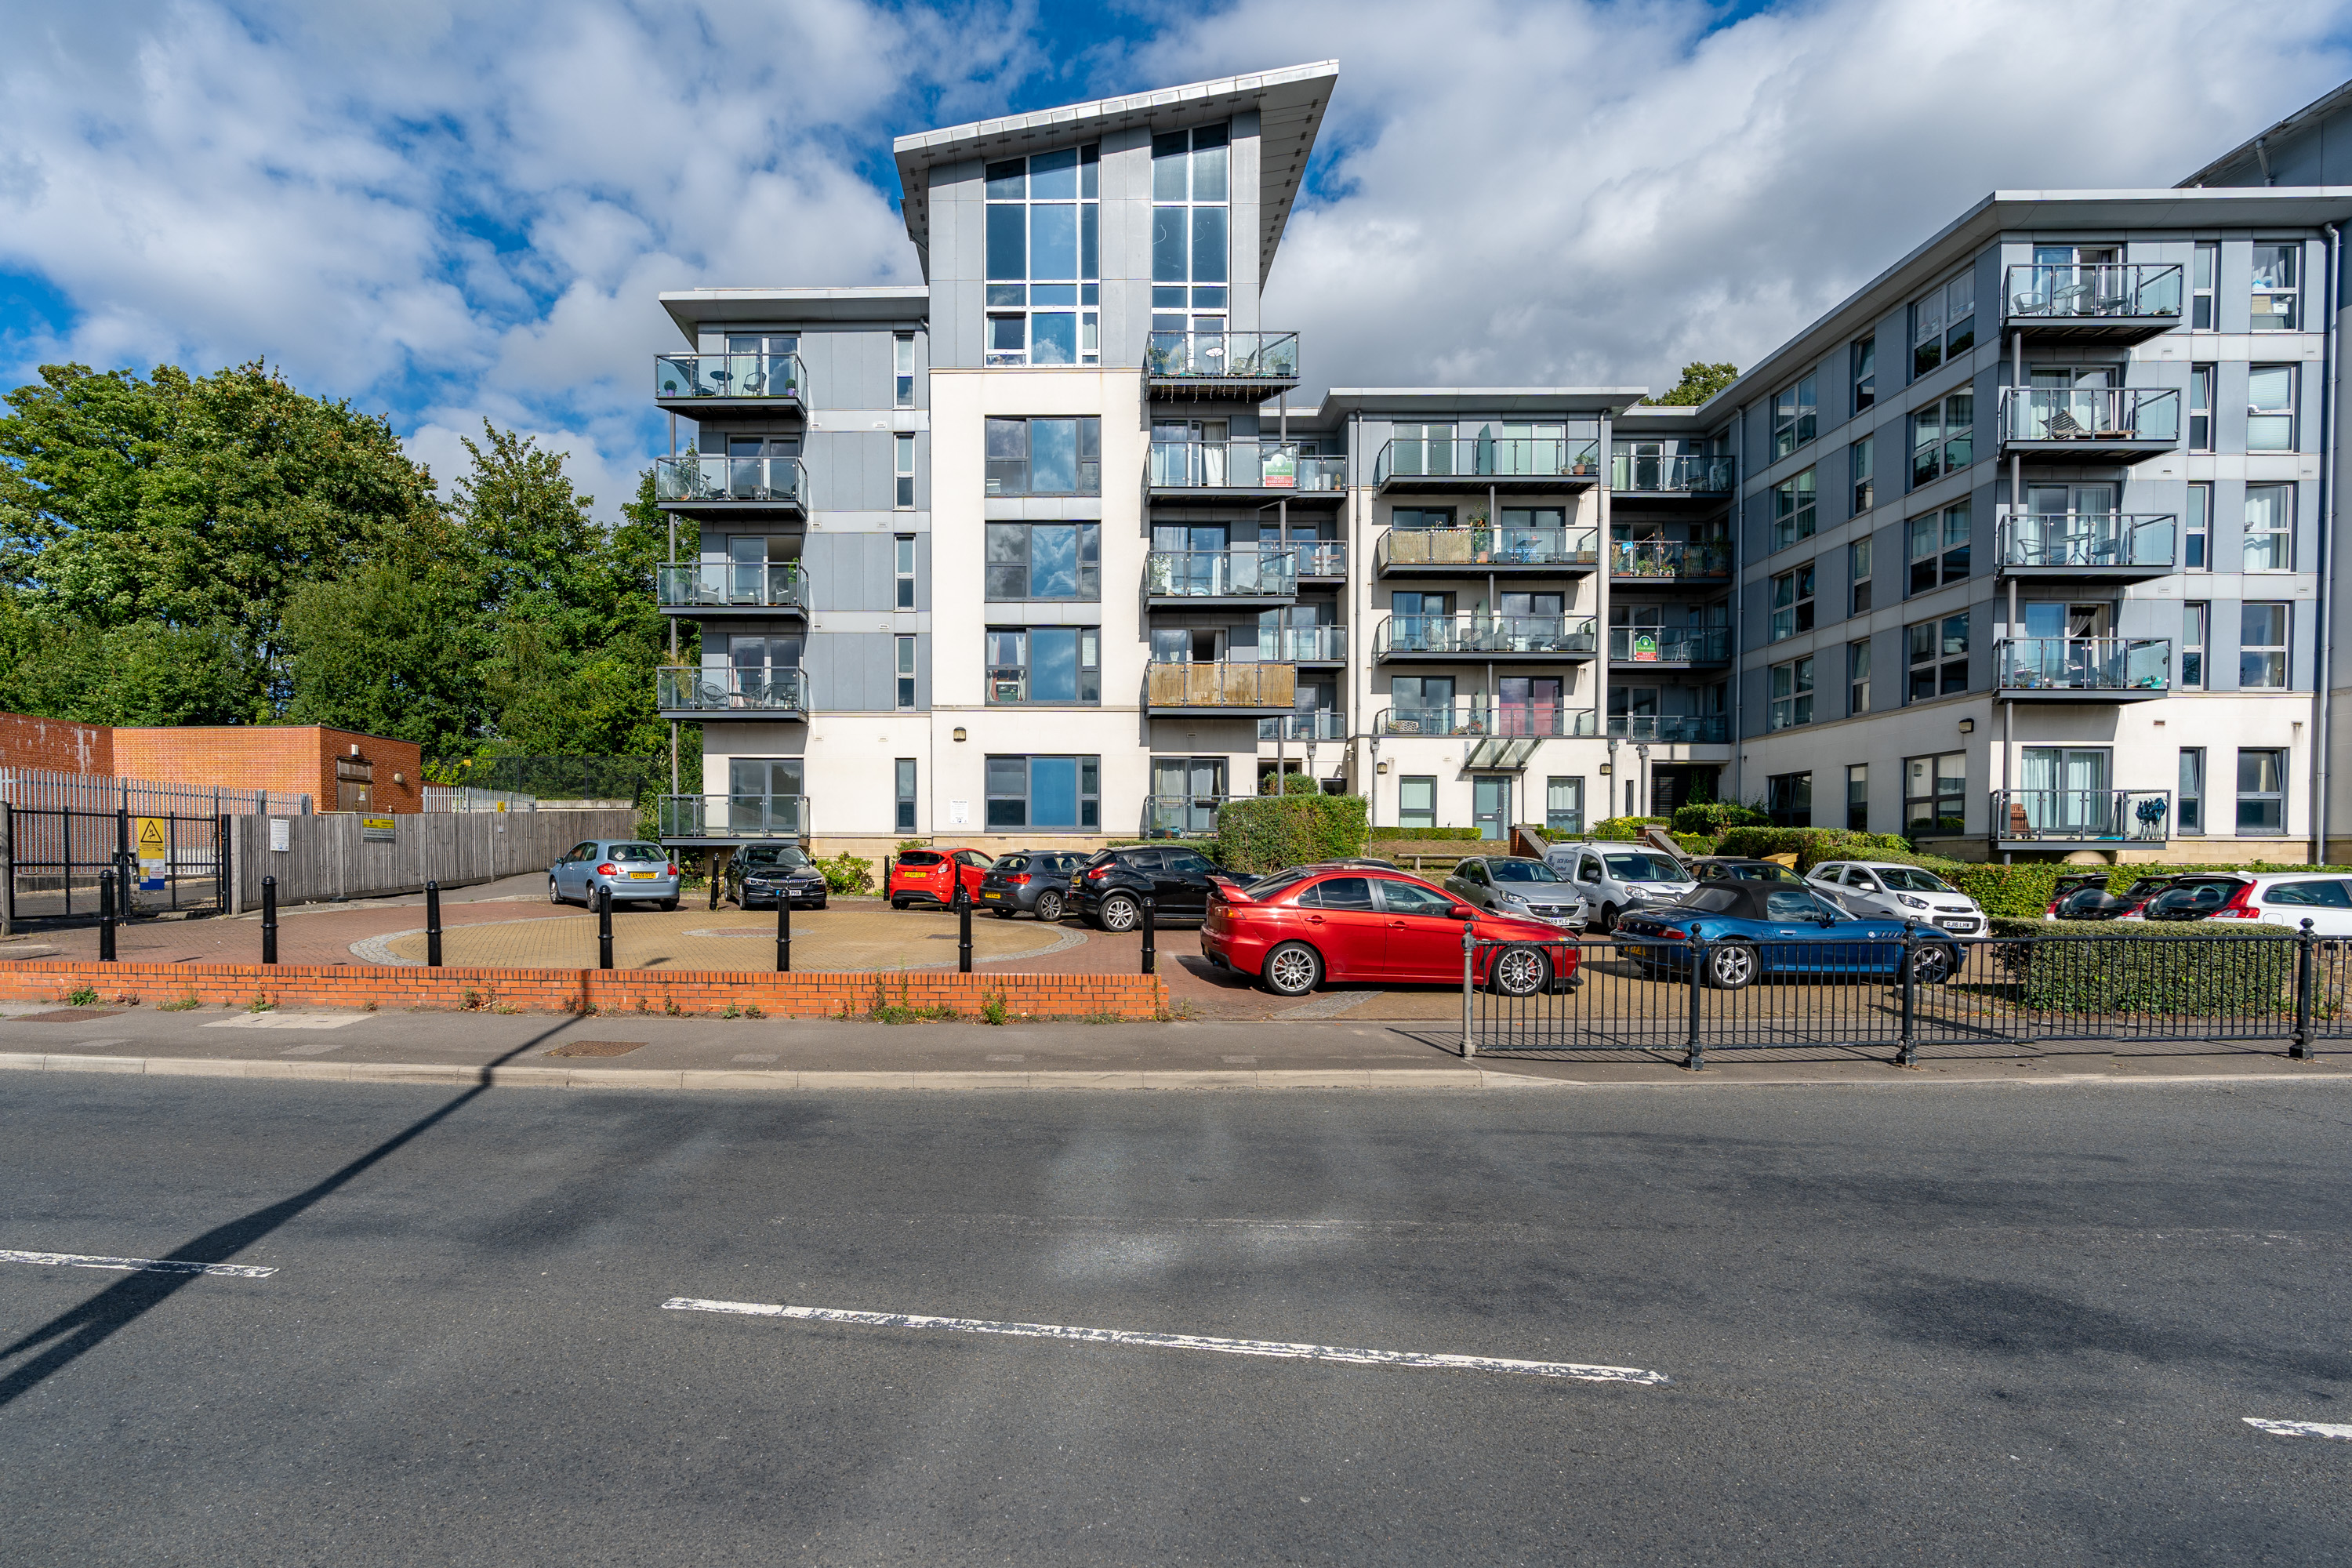 Sold In Your Areal; McKenzie Court, Maidstone